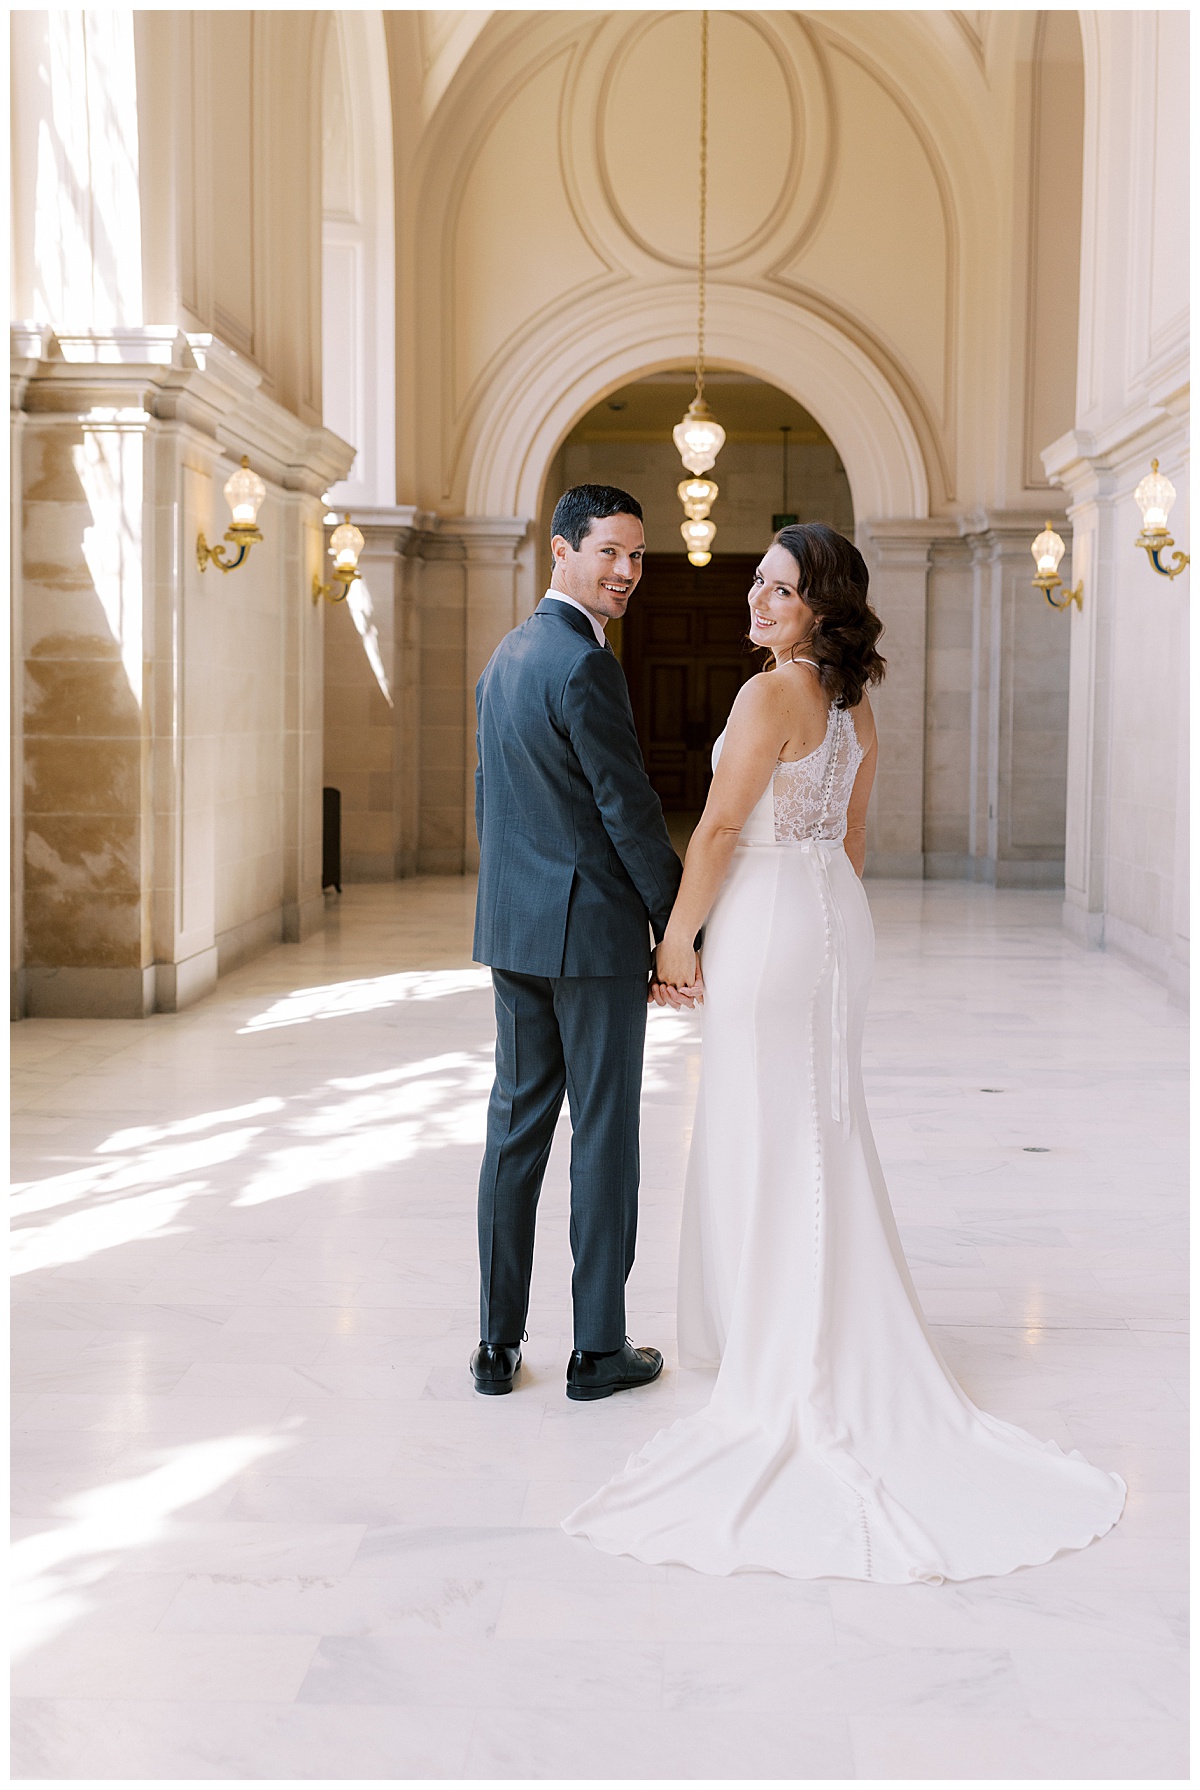 Hillary and Nick's couples portraits after their vintage glam SF City Hall wedding